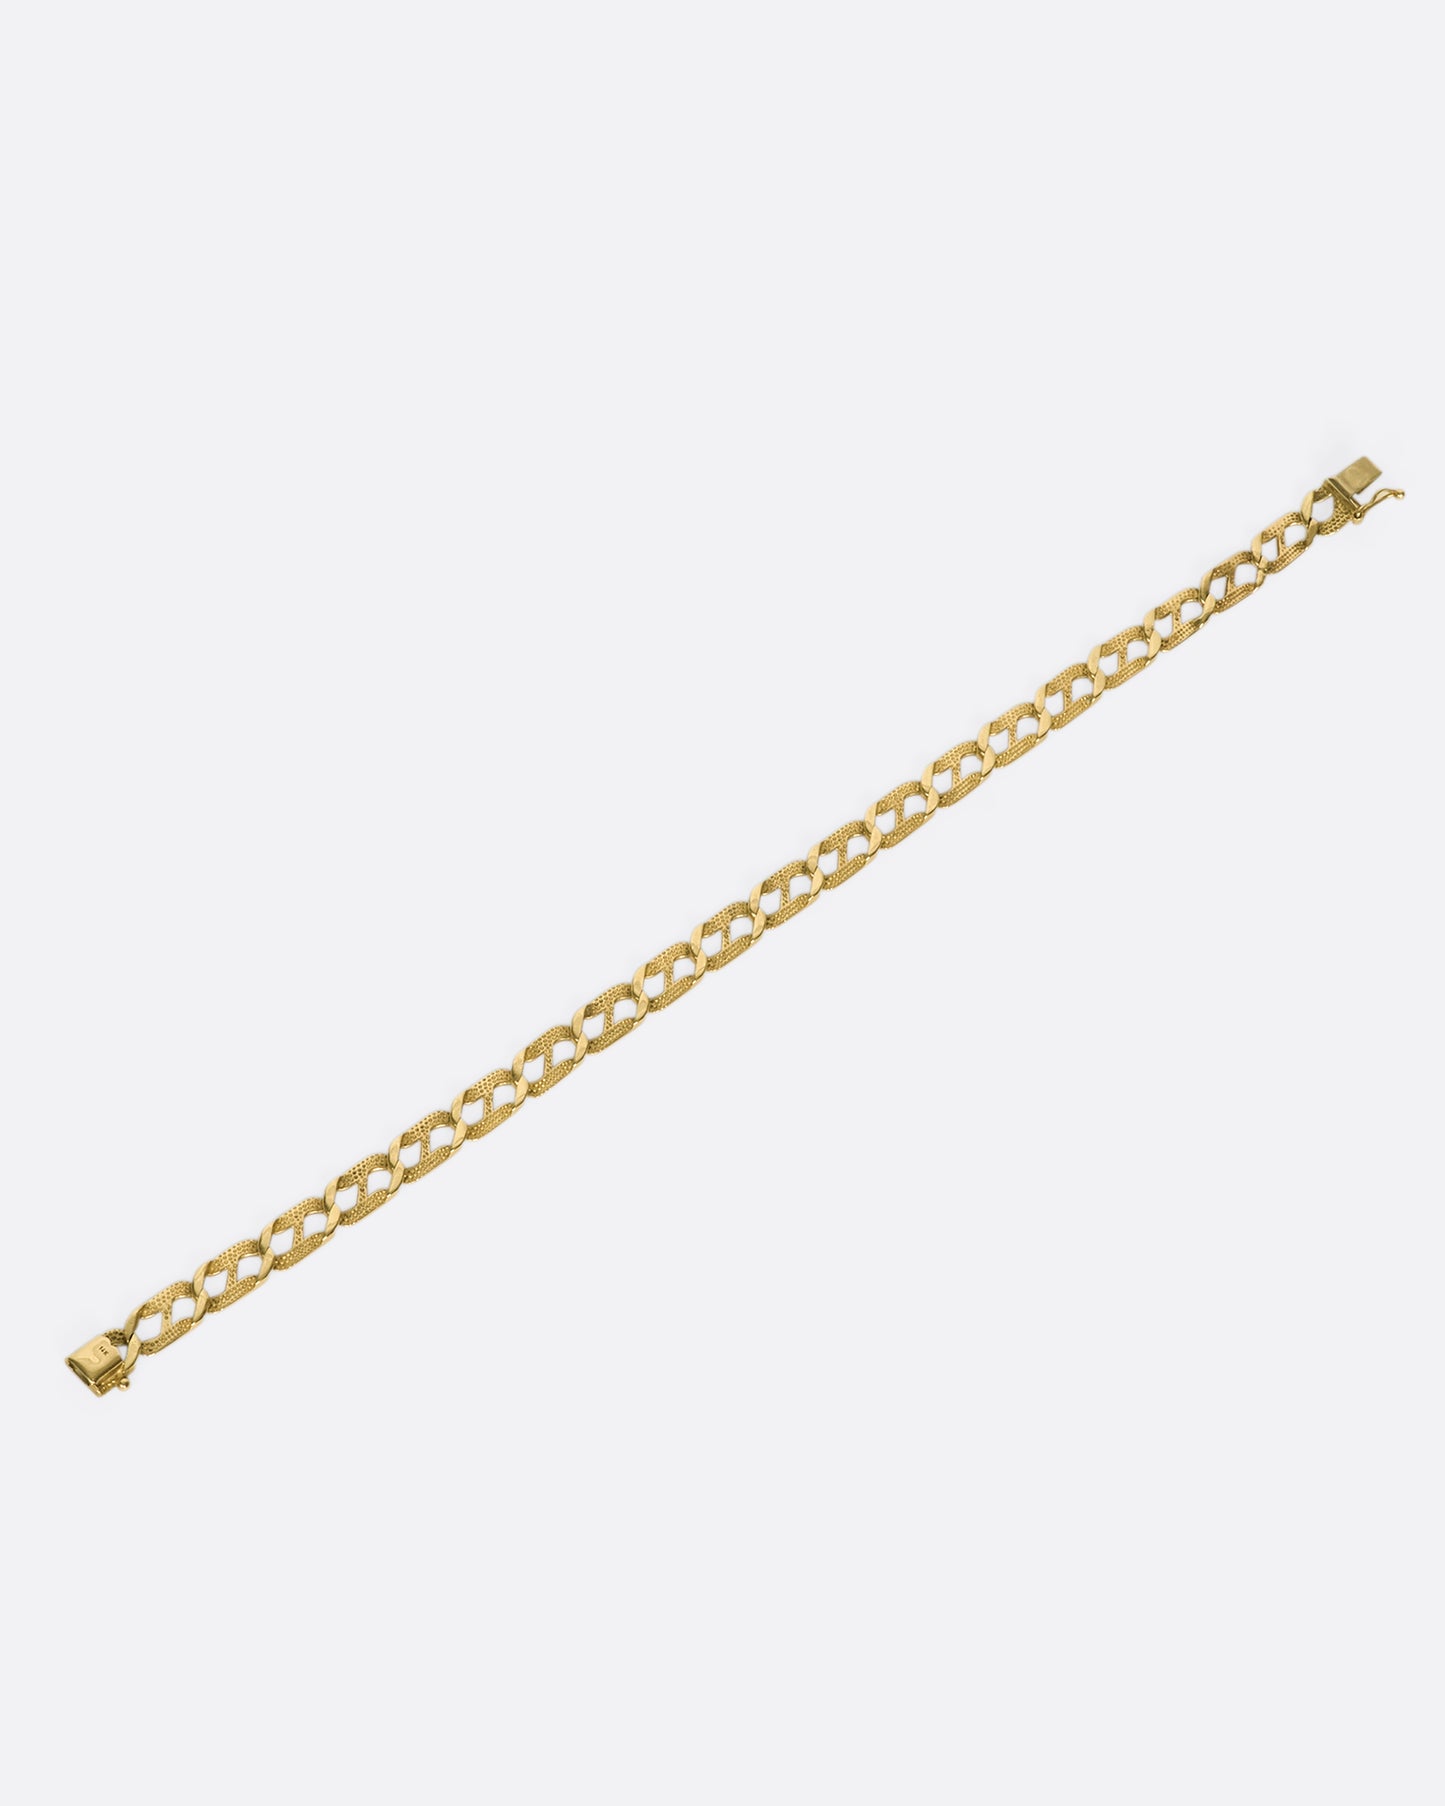 A vintage 14k gold flat mariner chain bracelet that's smooth on one side and textured on the other